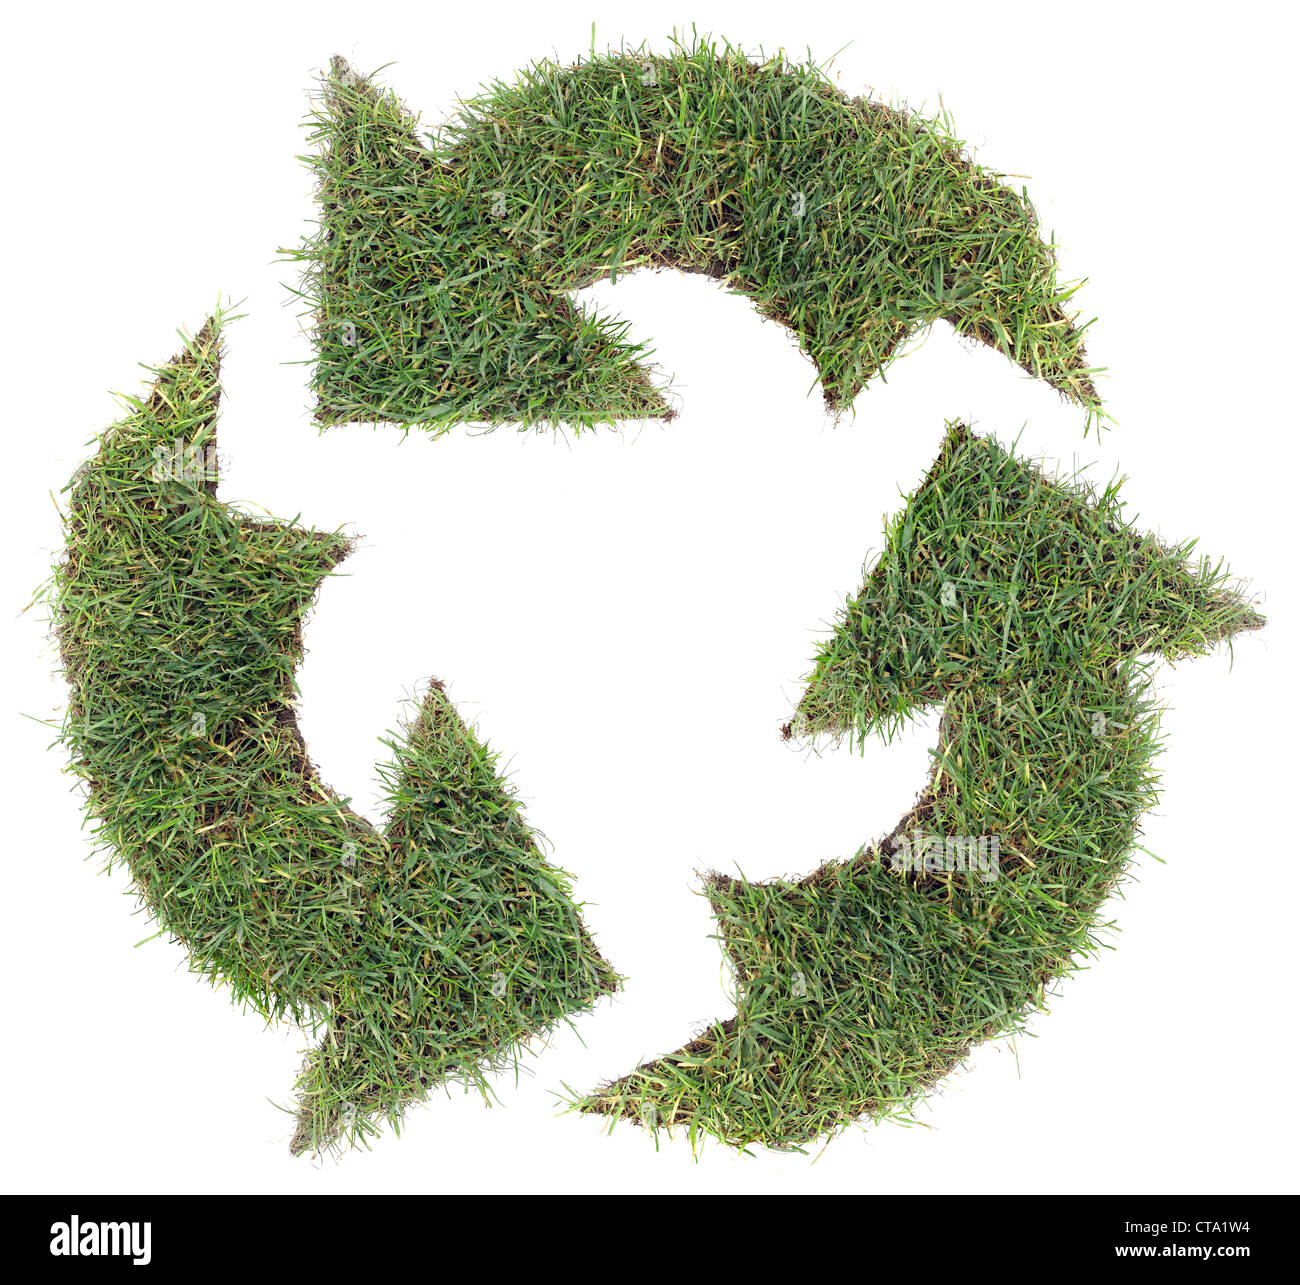 Recycling Symbol made with Grass Turf Isolated on White Background Stock Photo